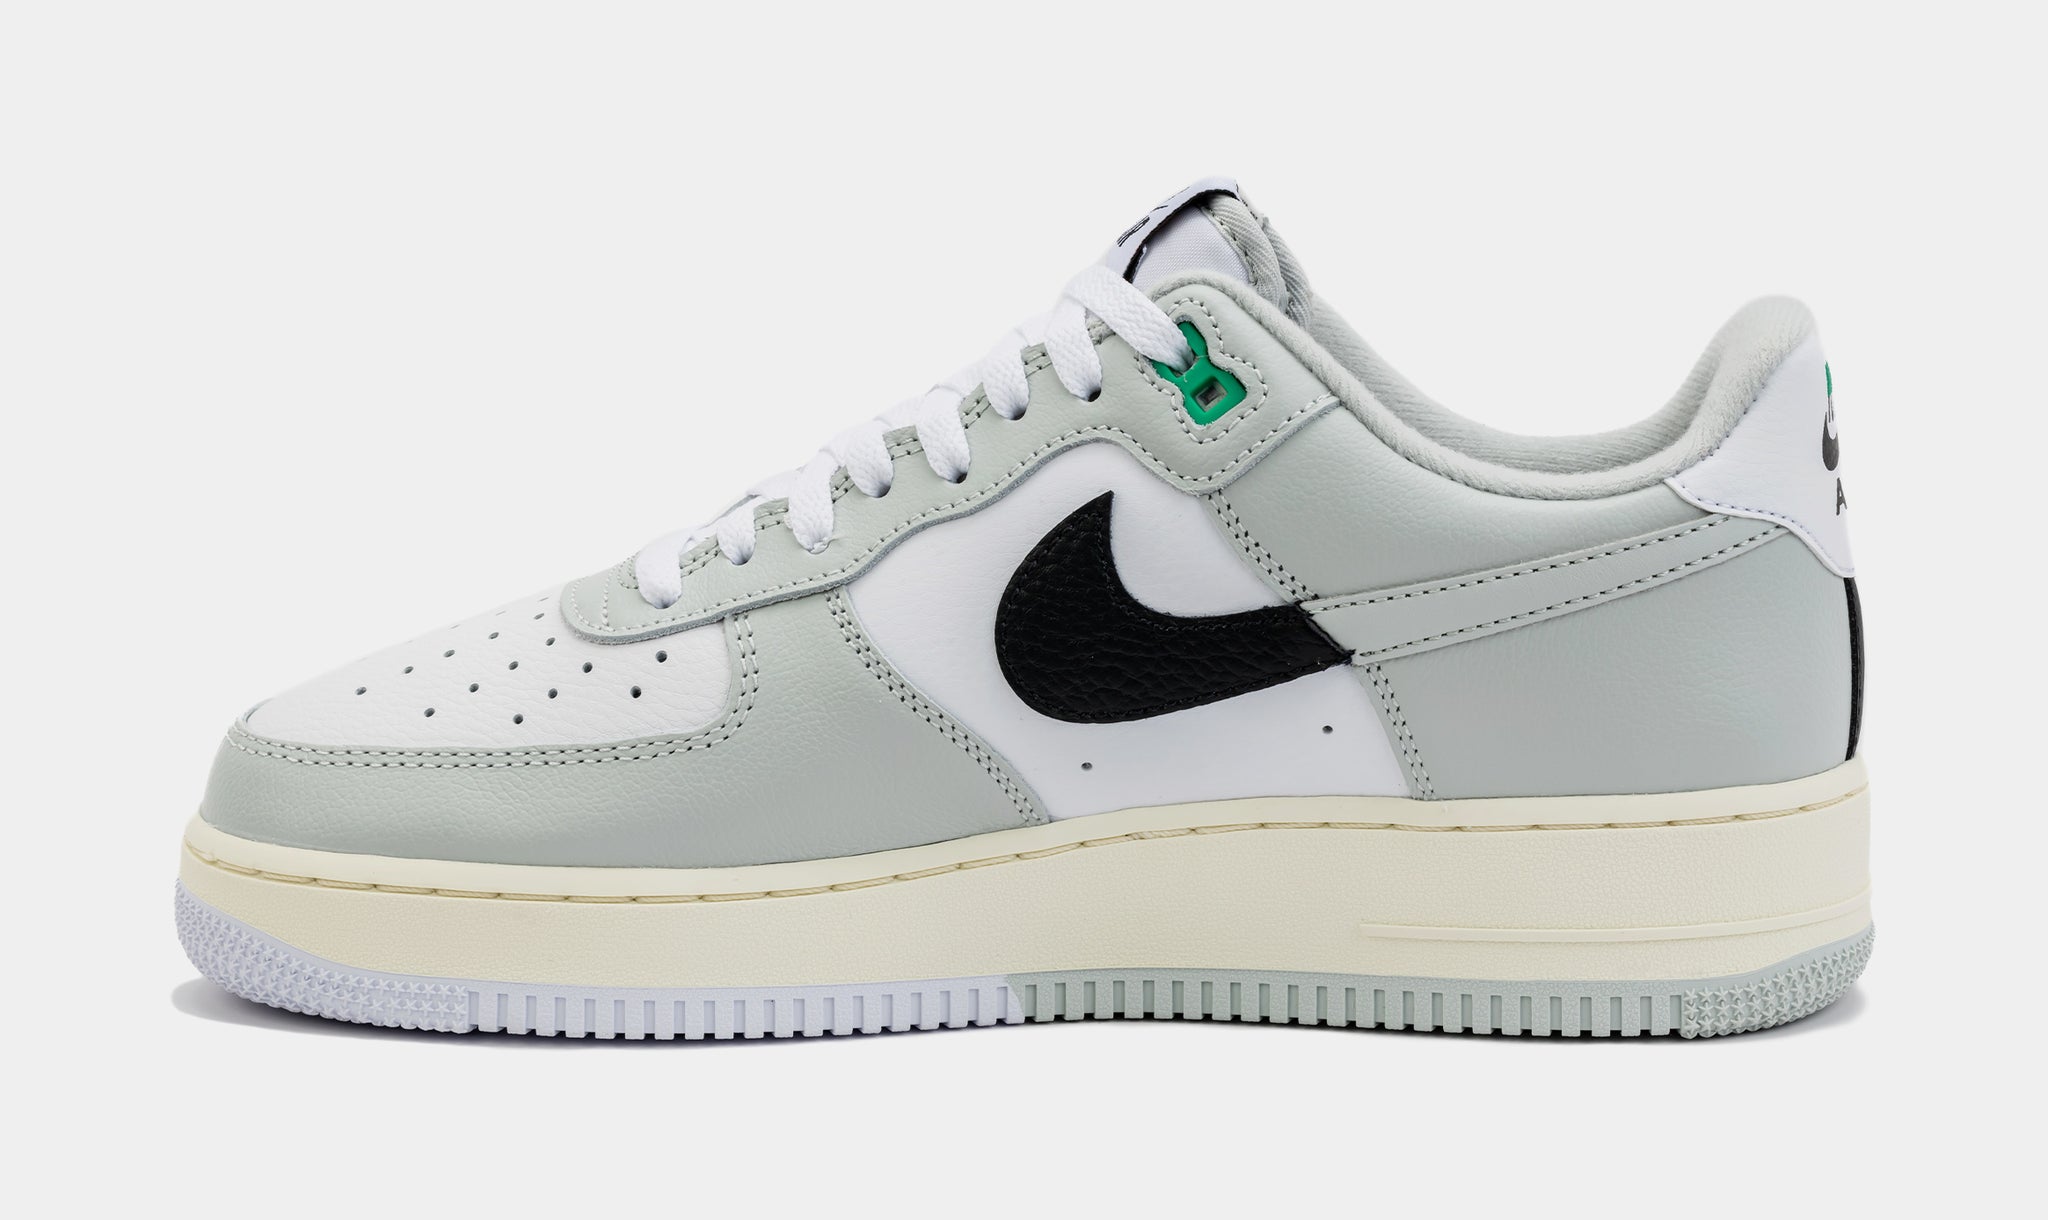 The Nike Air Force 1 Low UV Light Features Color Changing Details